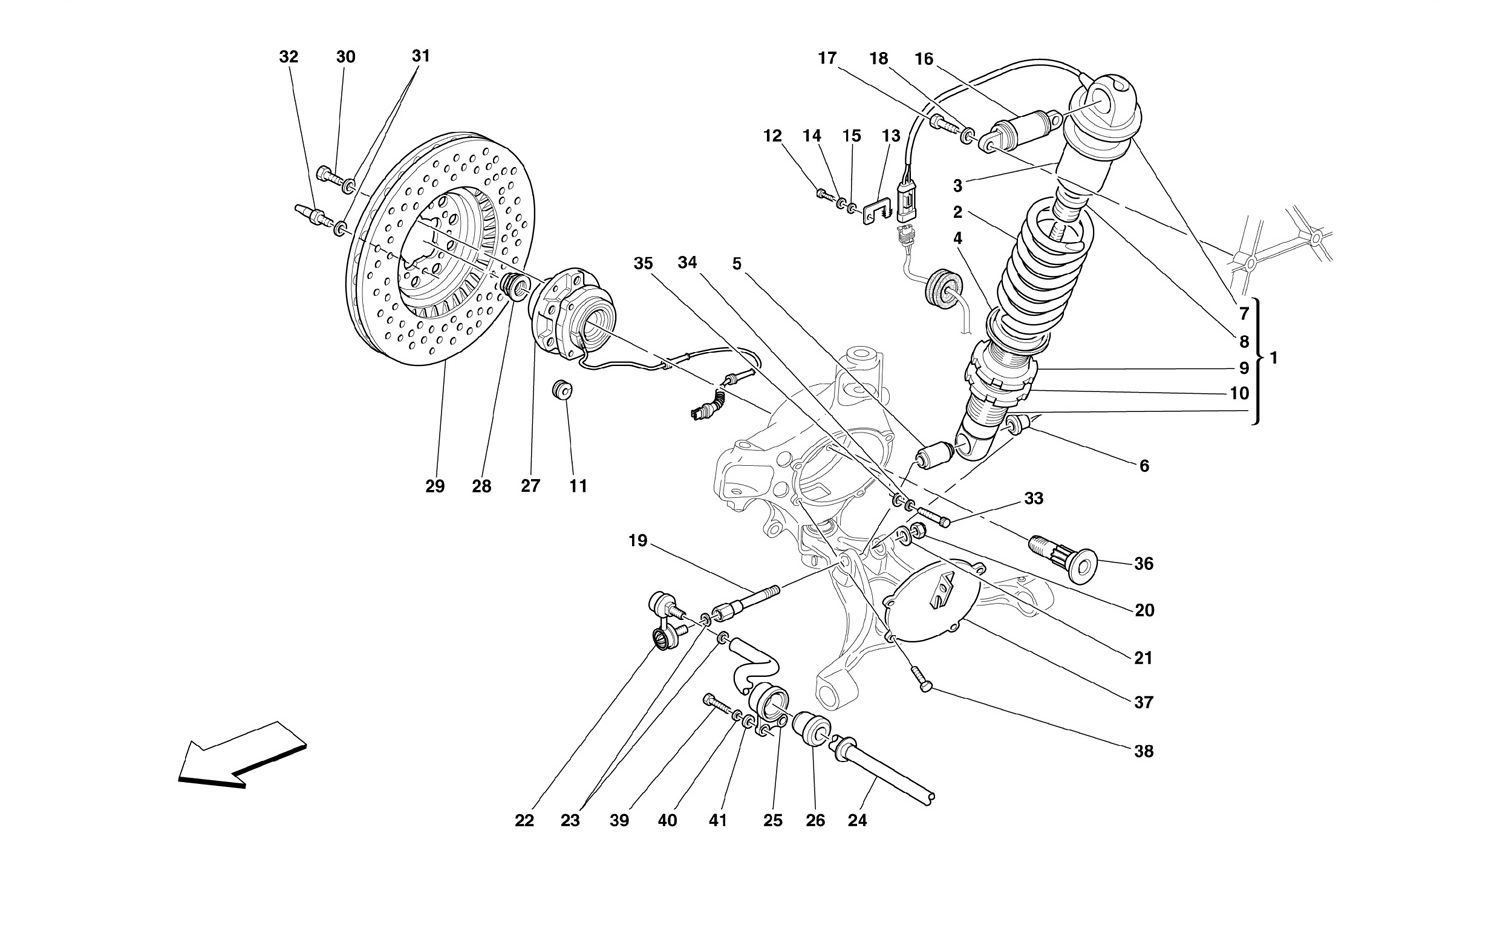 Schematic: Front Suspension - Shock Absorber And Brake Disc